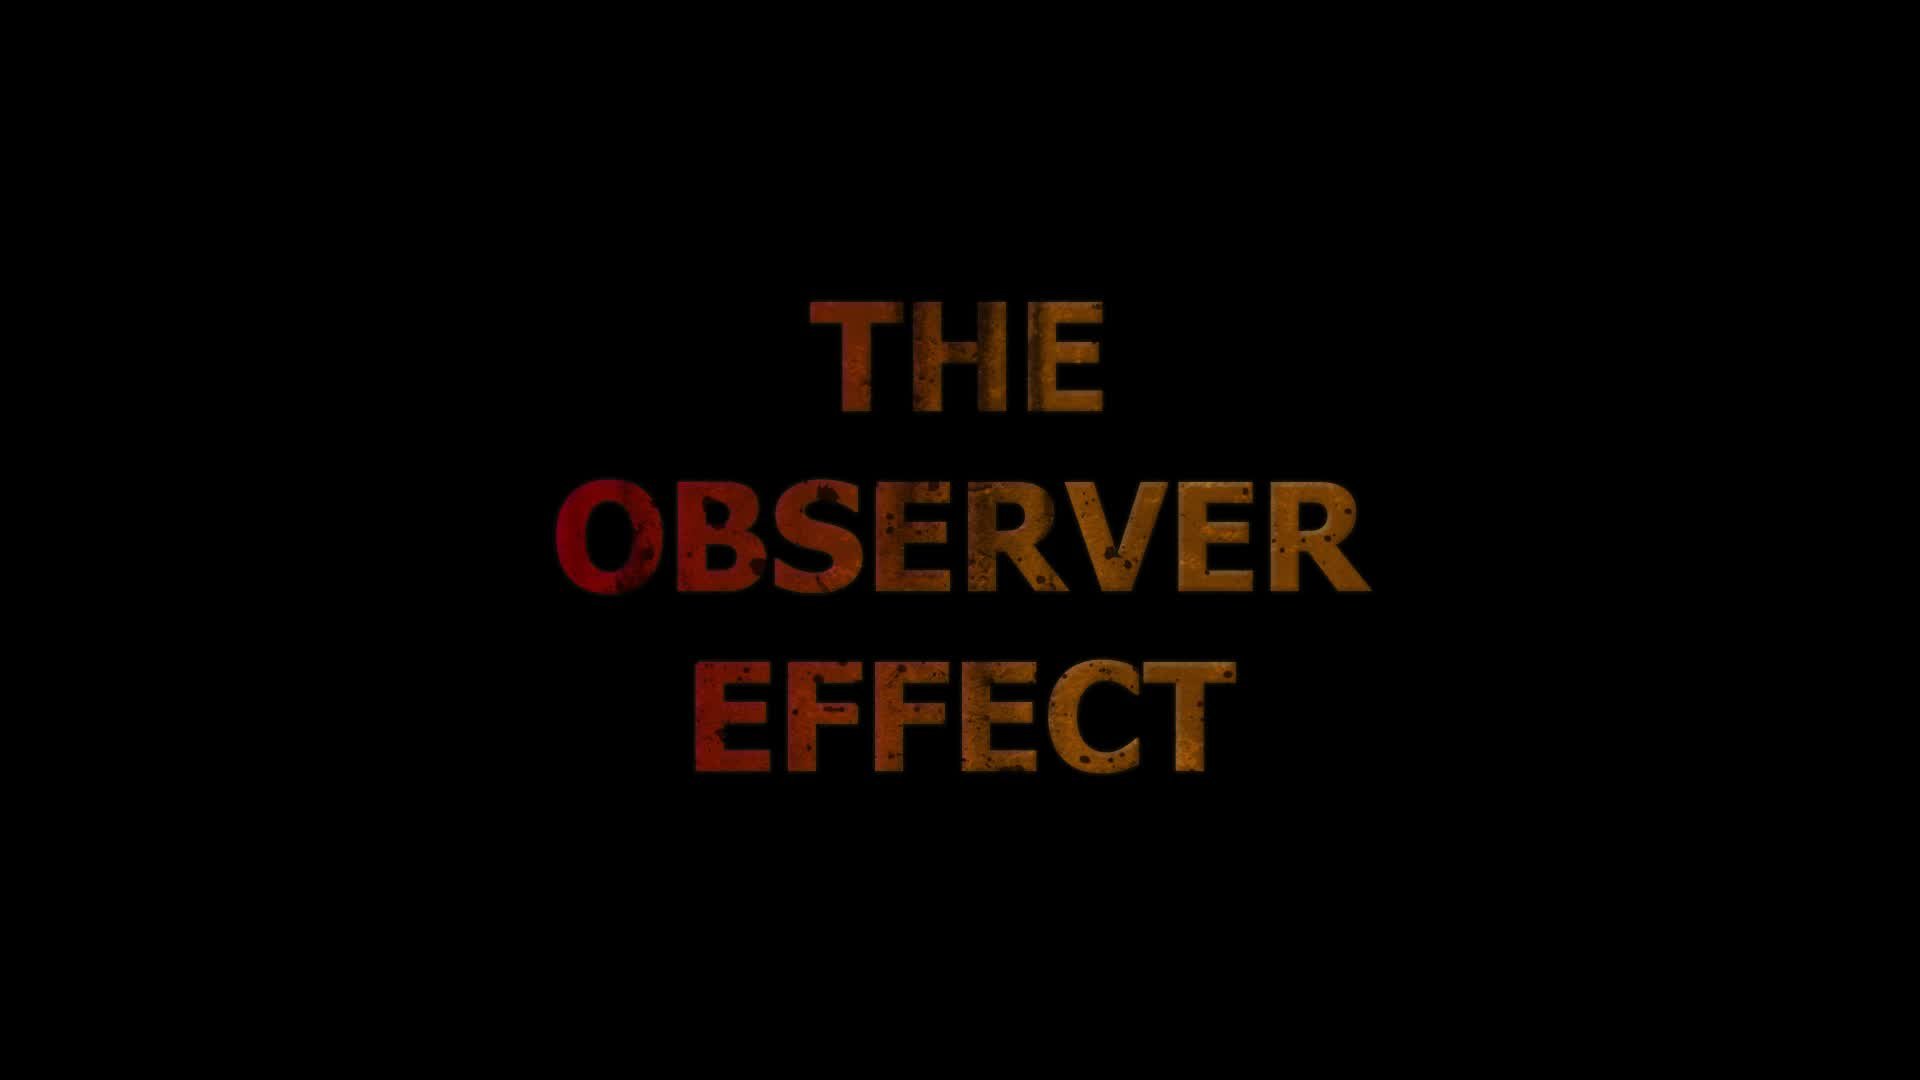 Working on writing something, how is it so far? The observer I the